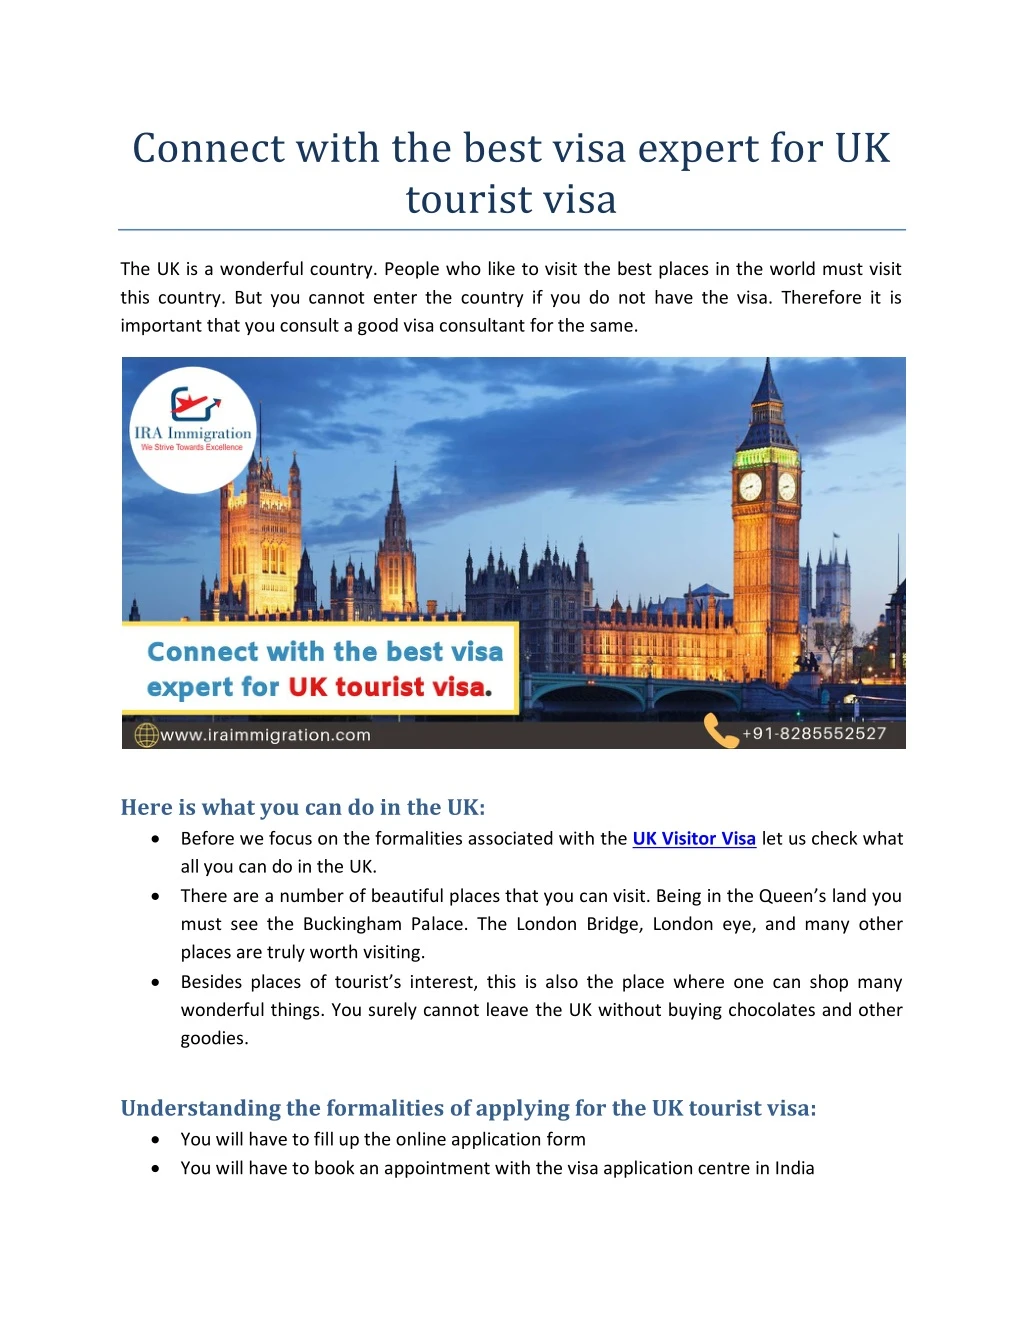 connect with the best visa expert for uk tourist